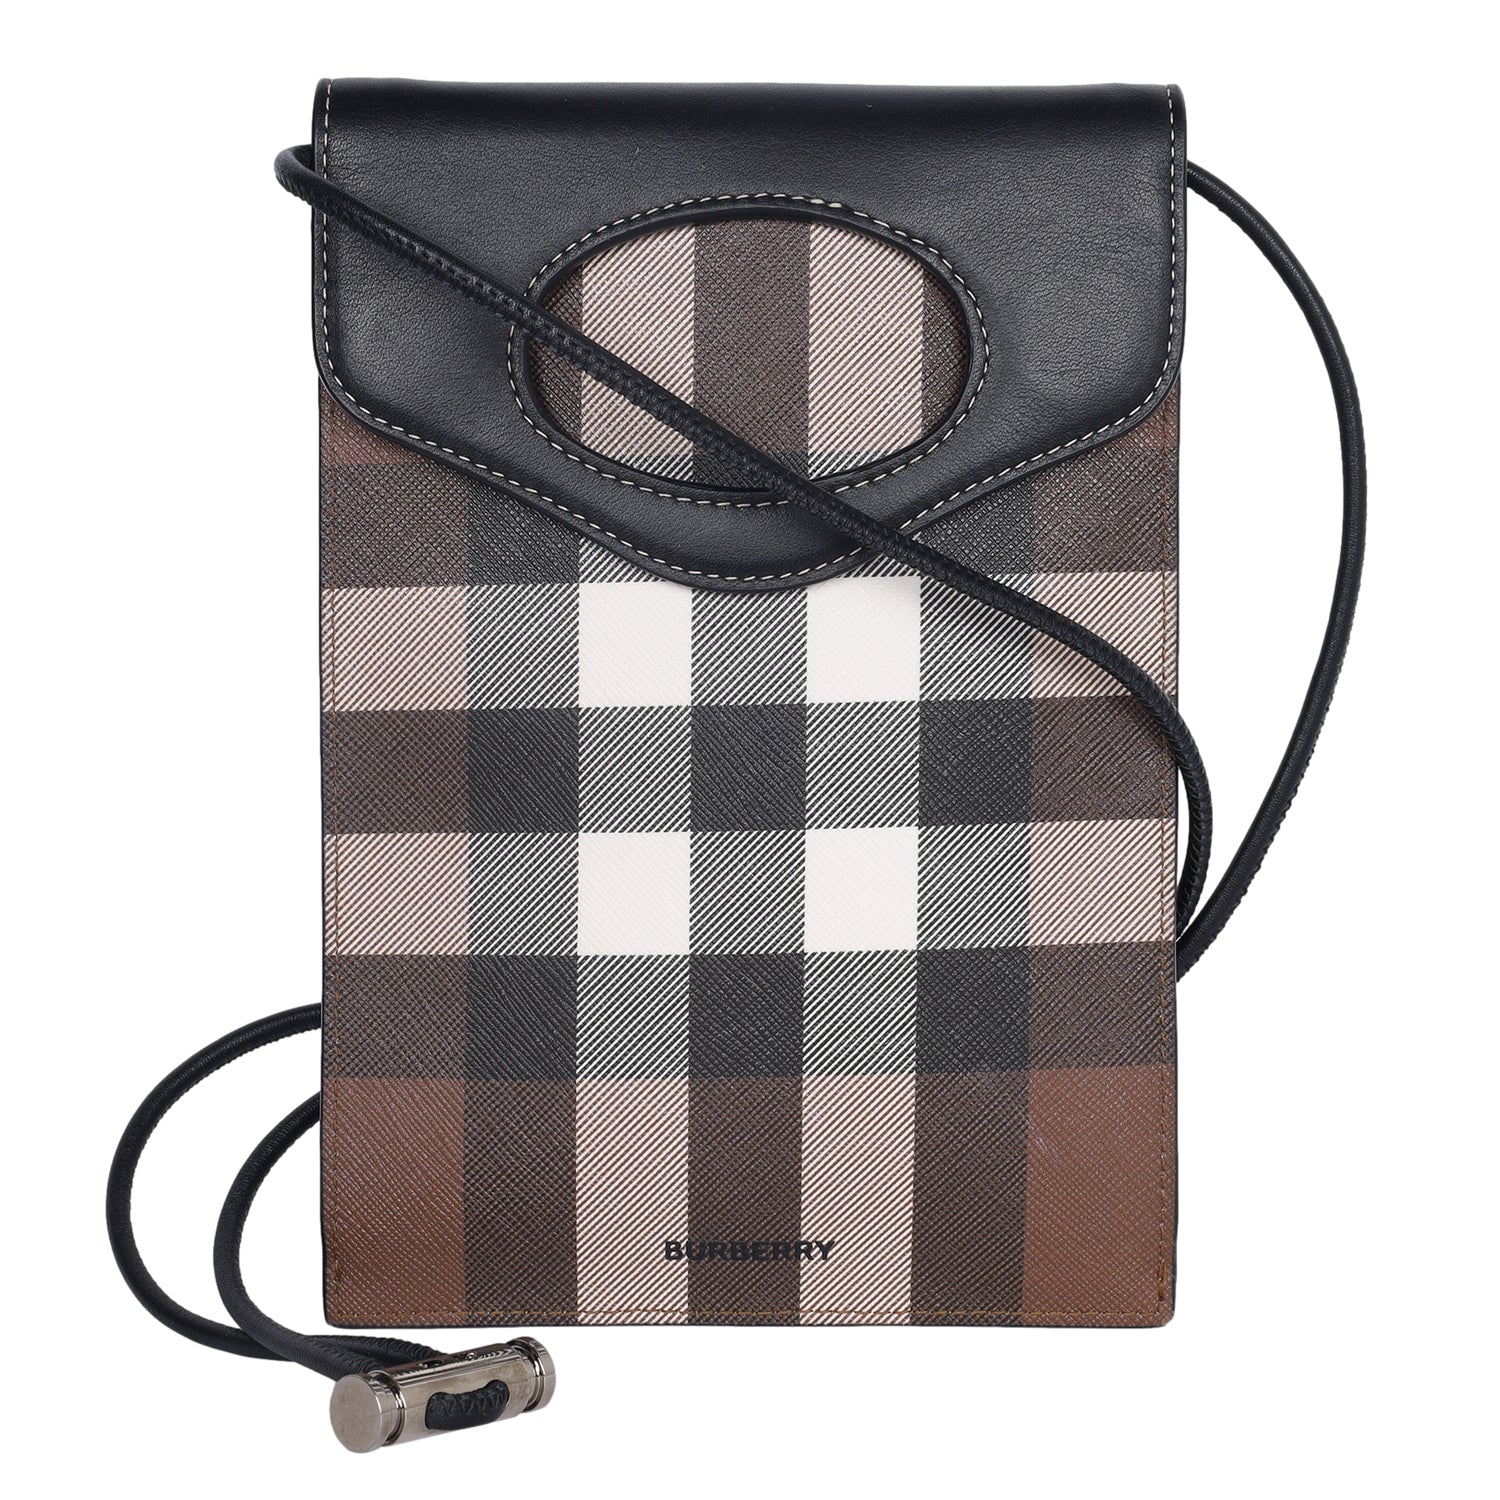 Checkered Tote with pouch(Cream, Brown, Black)